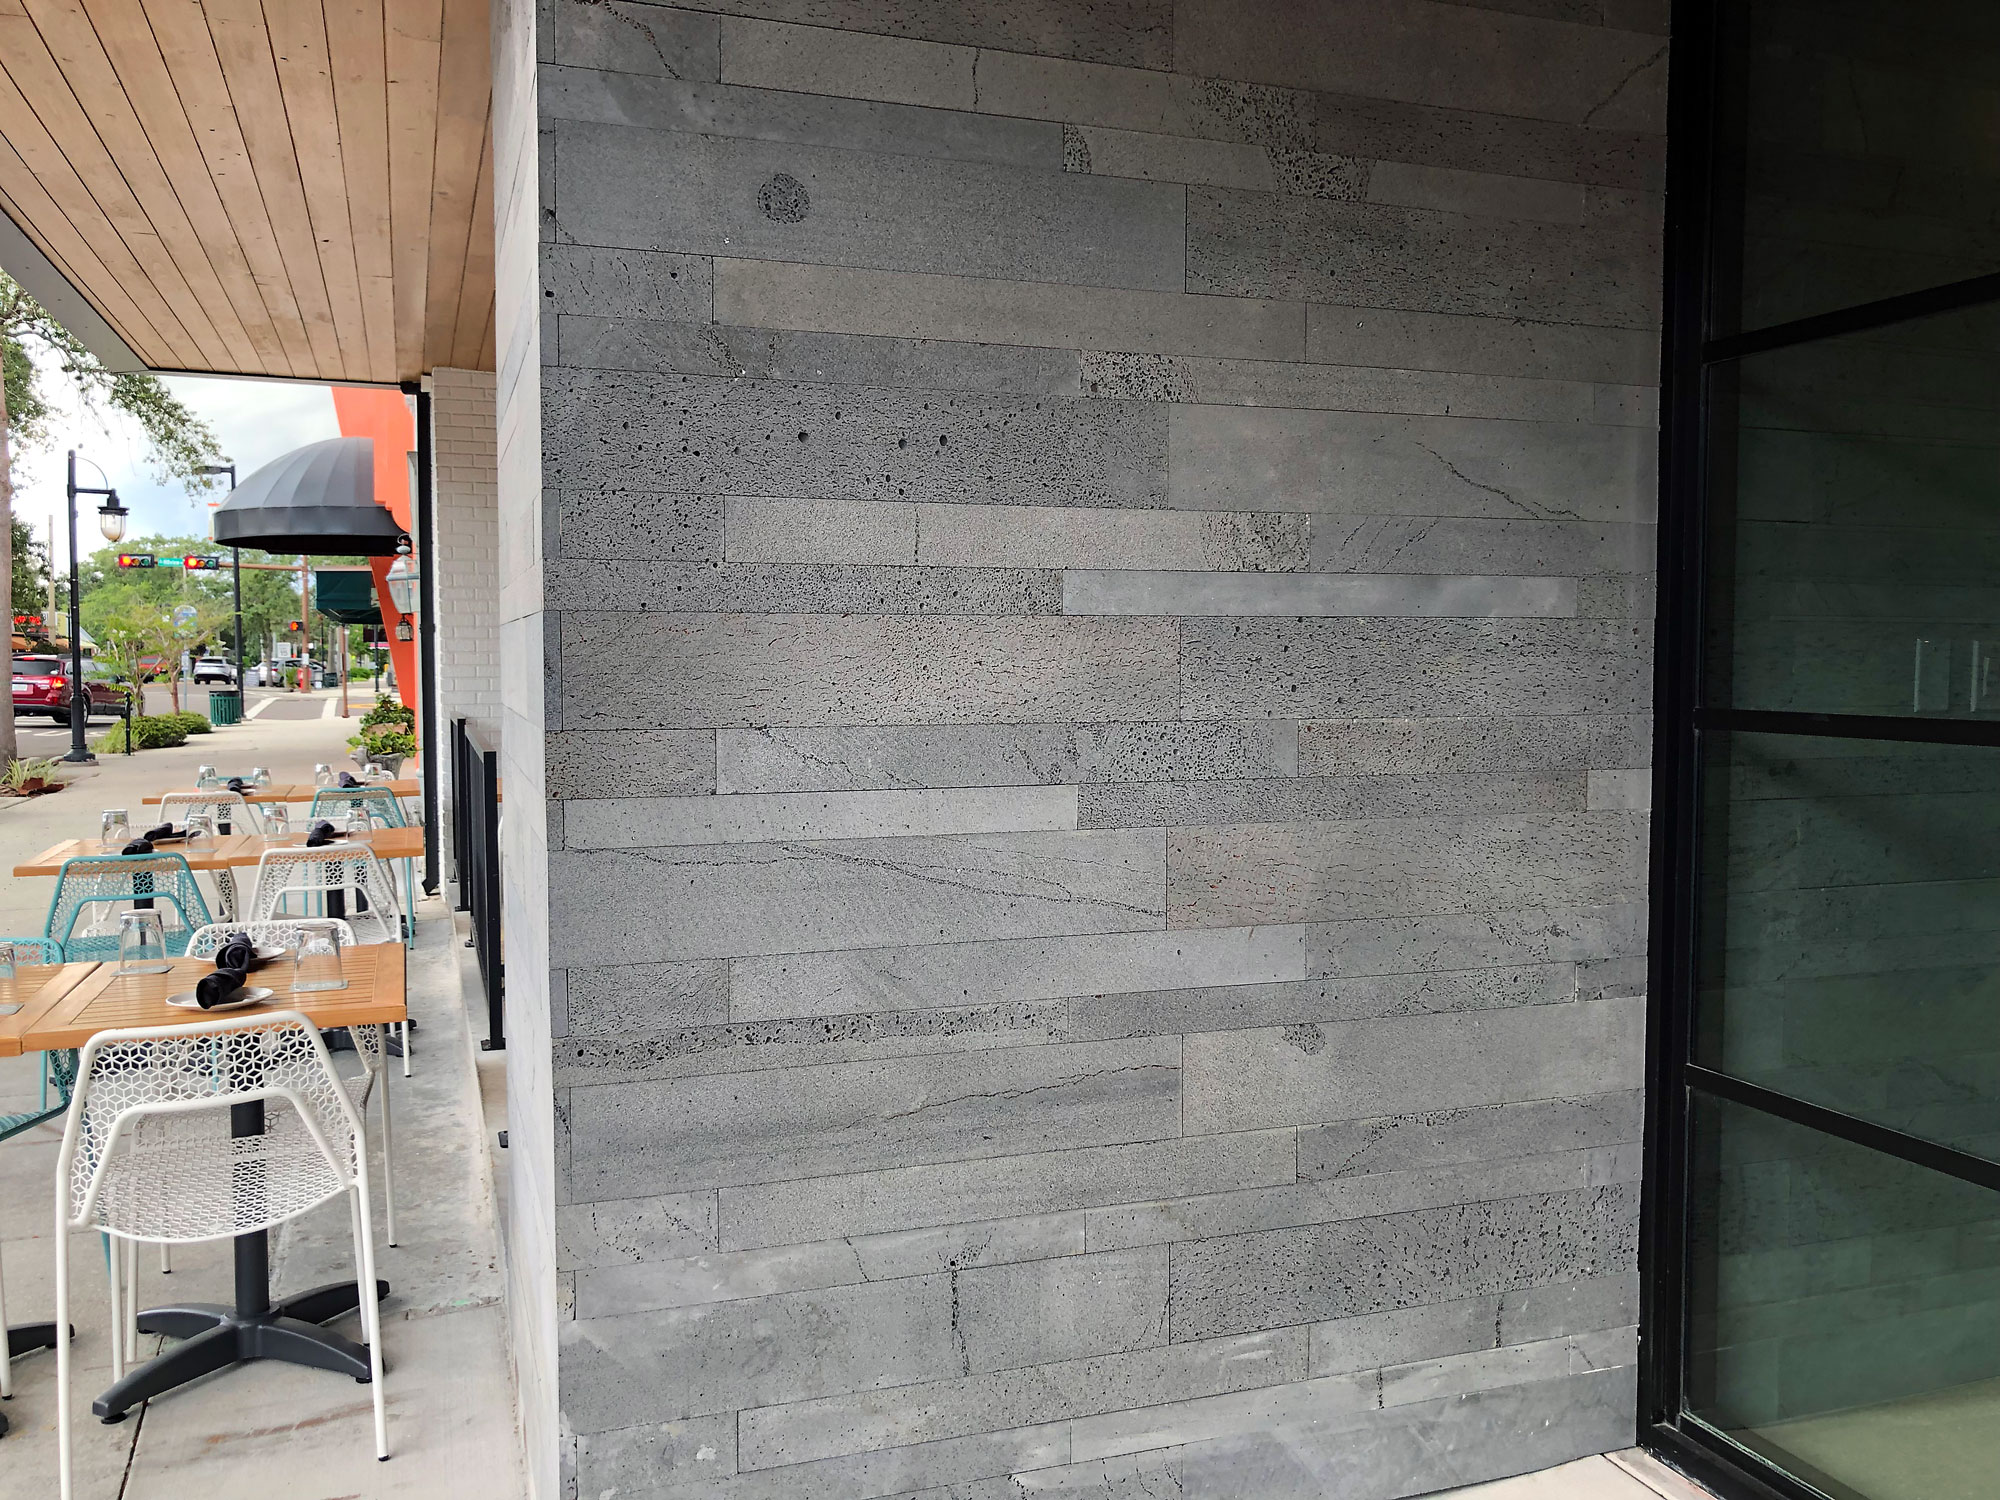 Entryway to a restaurant clad in Norstone Planc Series large format tile with an alternating overlap outside corner